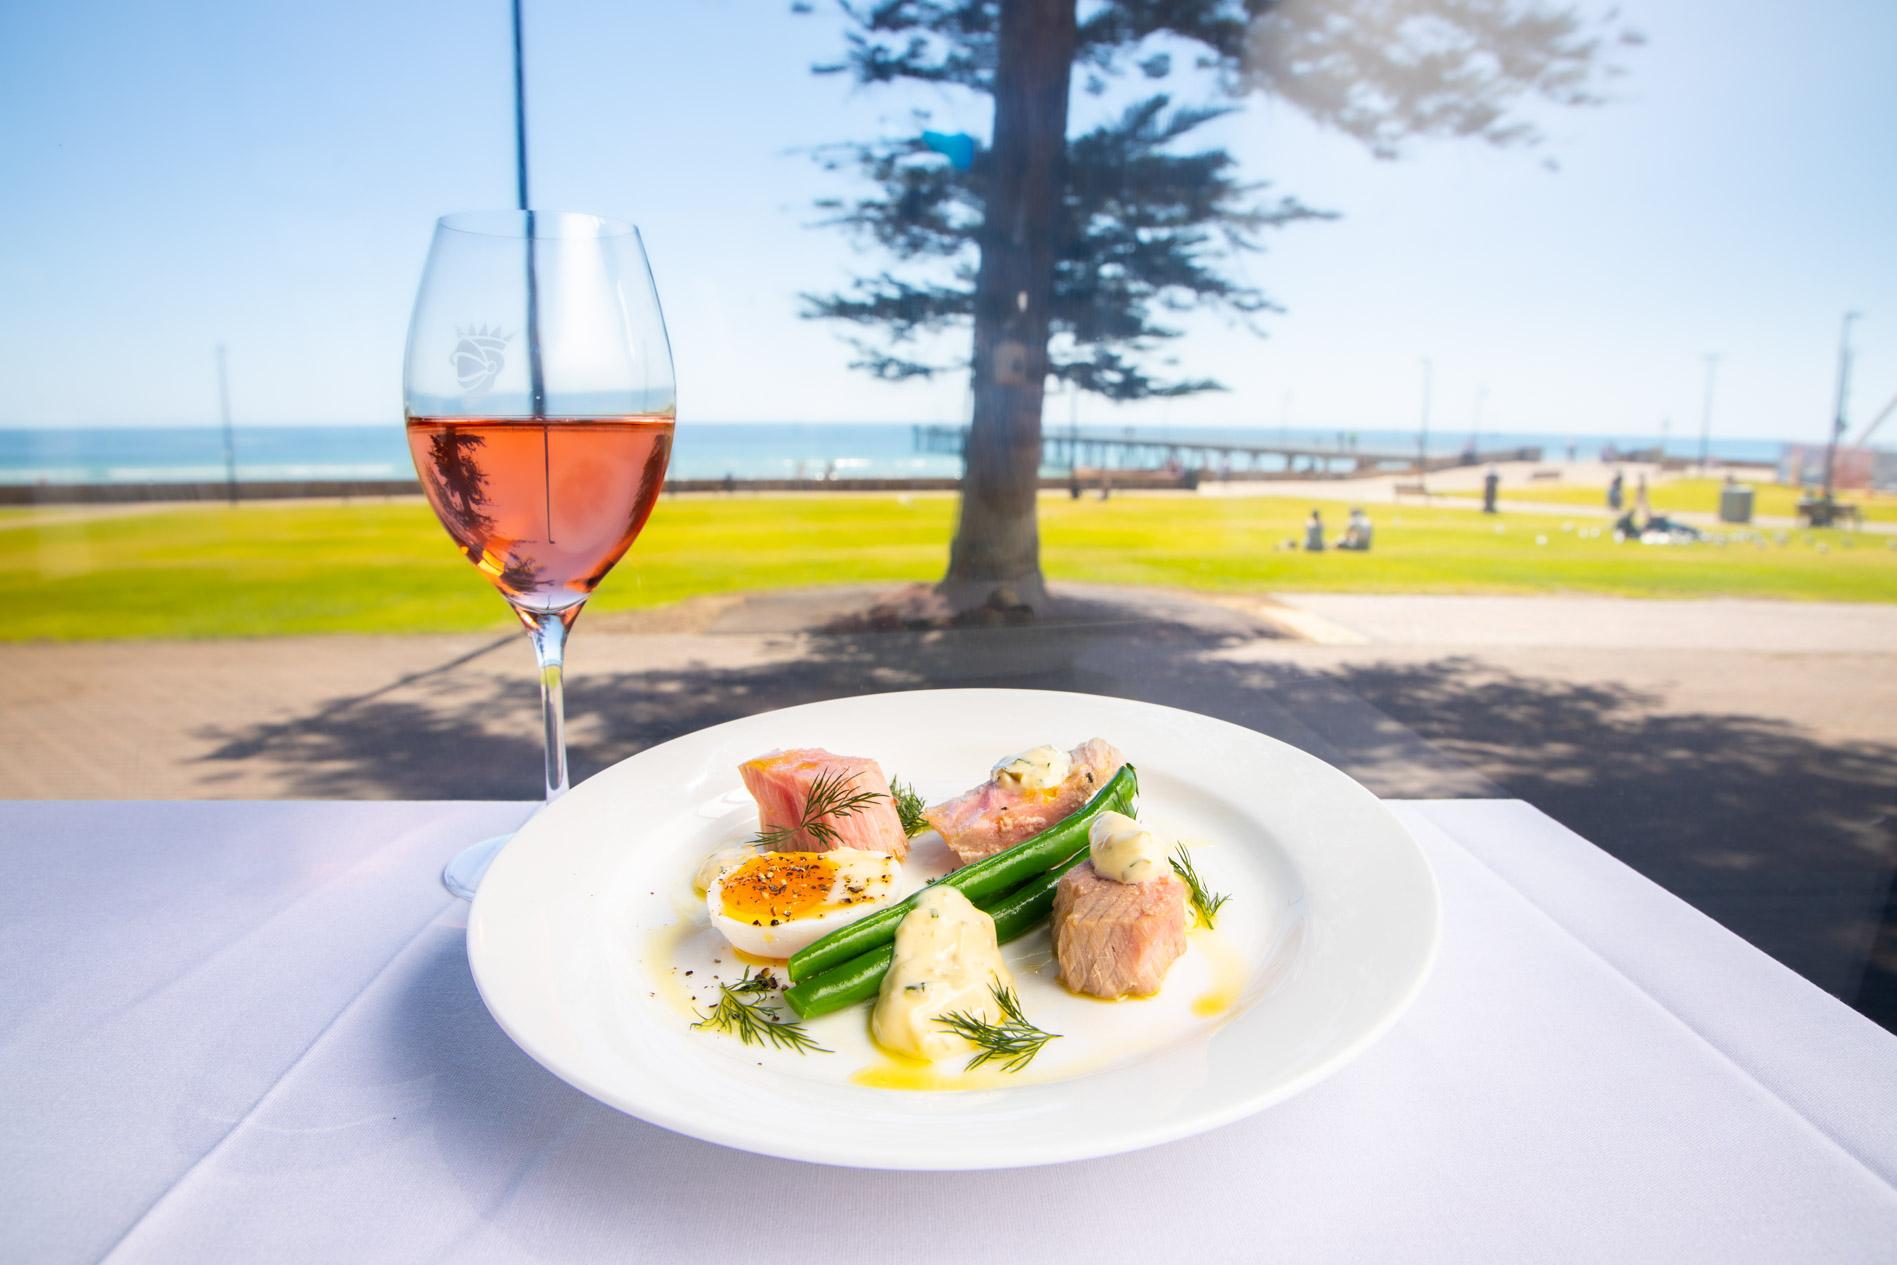 Summer Rose Wine Dinner with South Australian Wines